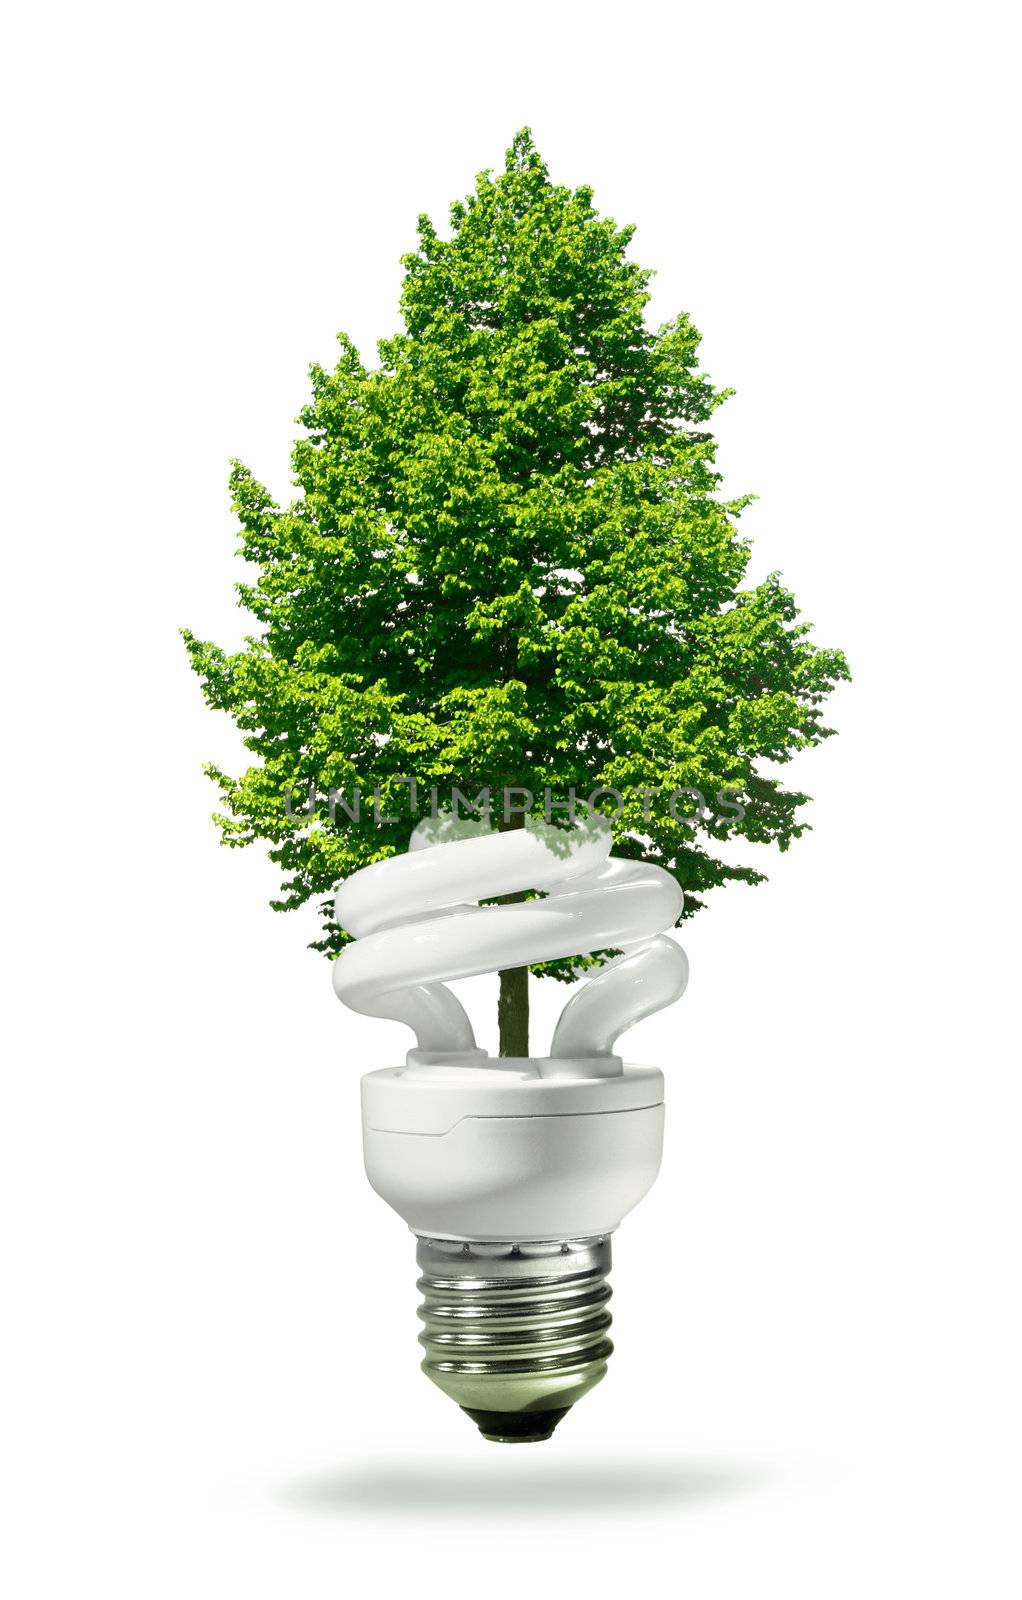 Eco lamp with new green tree growing through